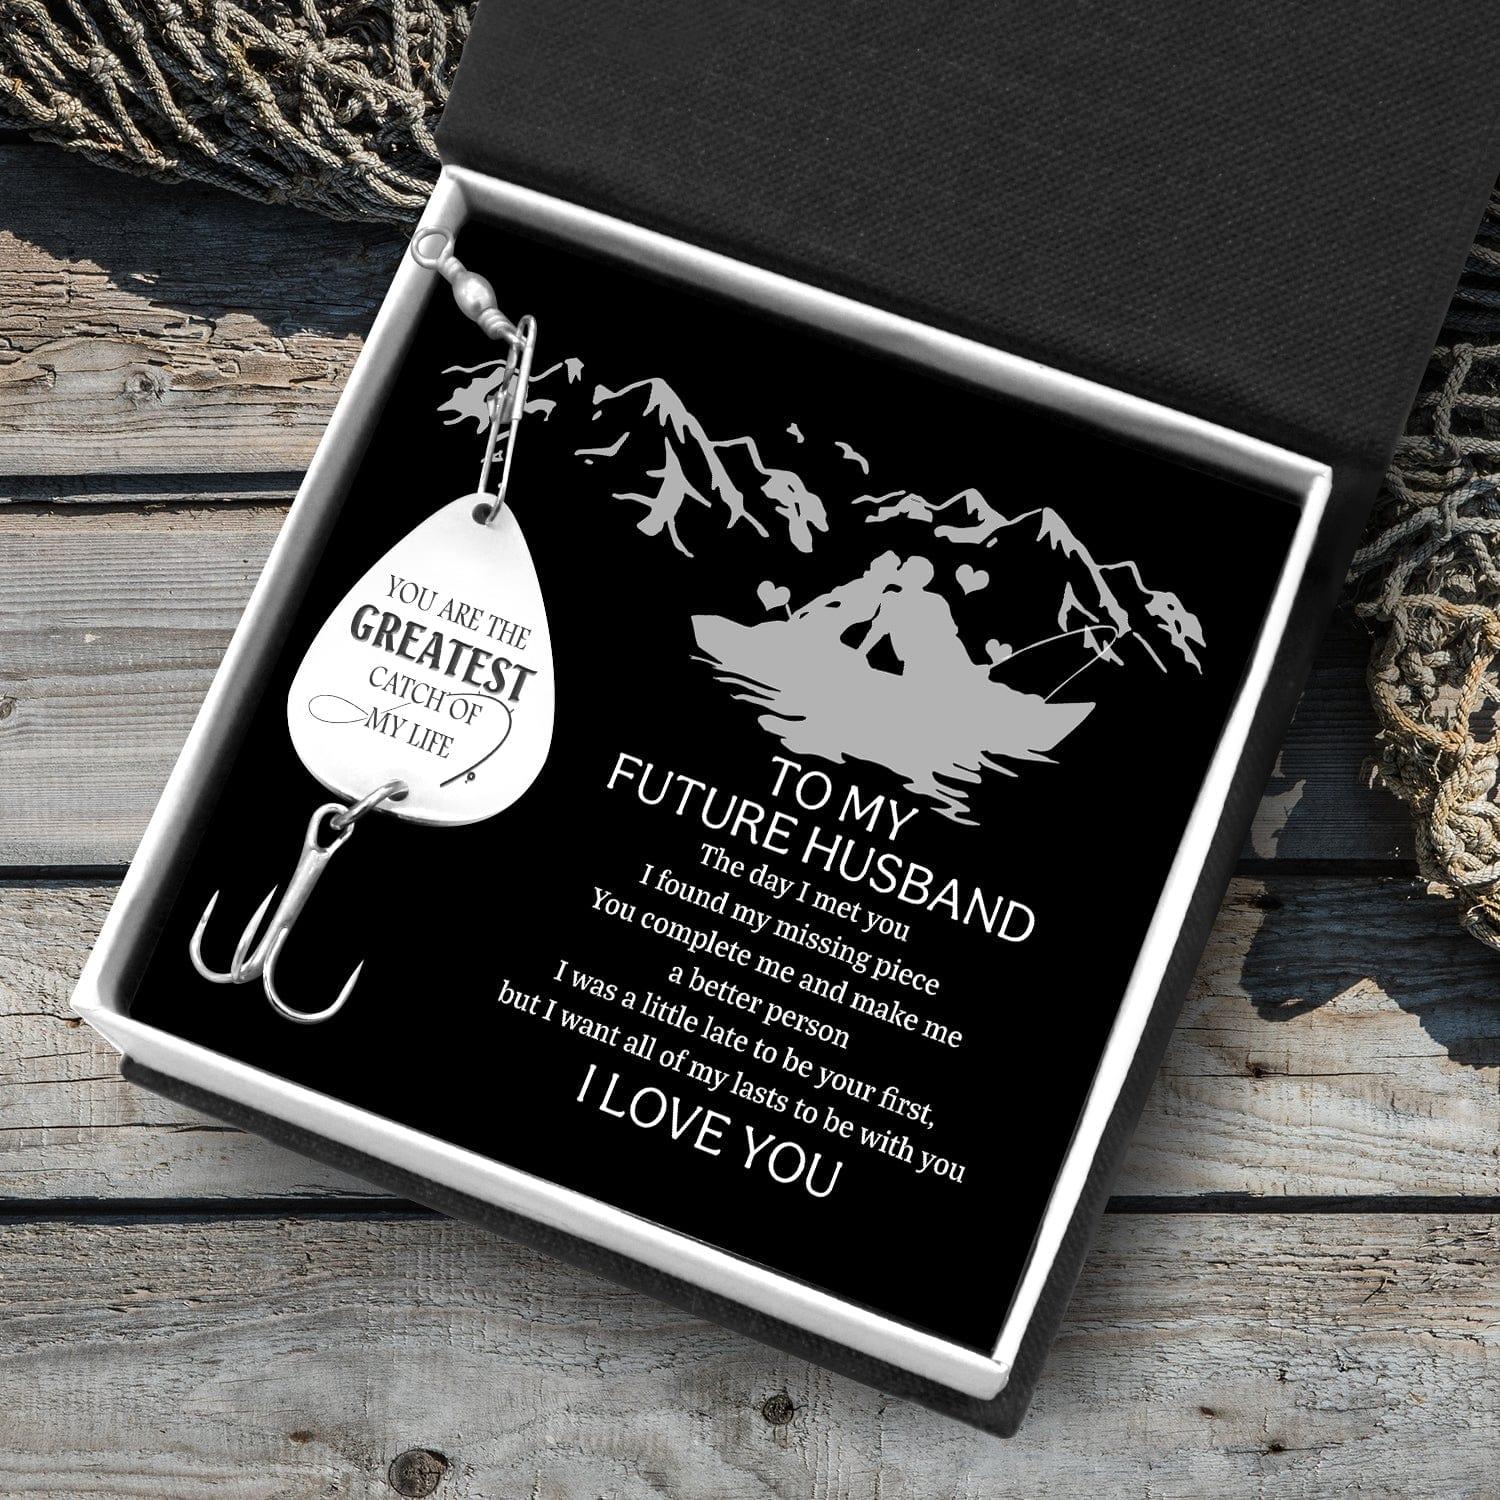 Engraved Fishing Hook - To My Future Husband - You Are The Greatest Catch Of My Life - Augfa24004 - Gifts Holder